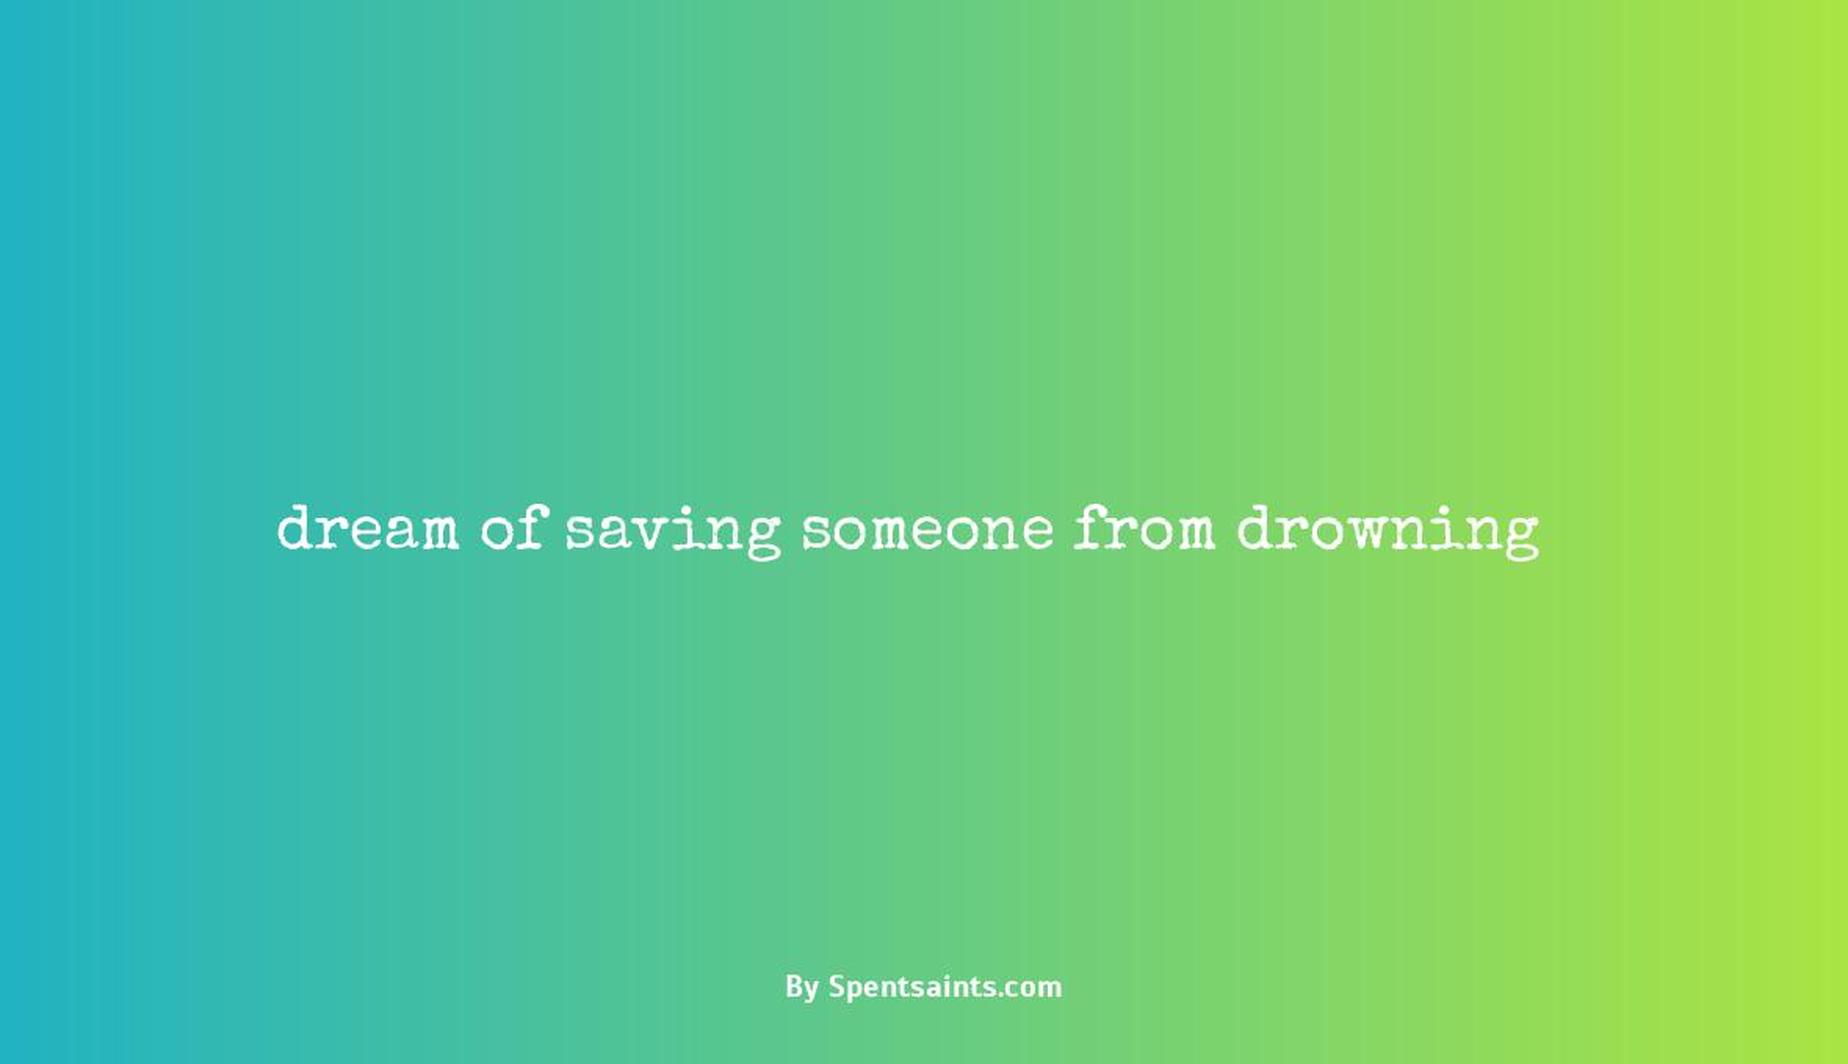 dream of saving someone from drowning